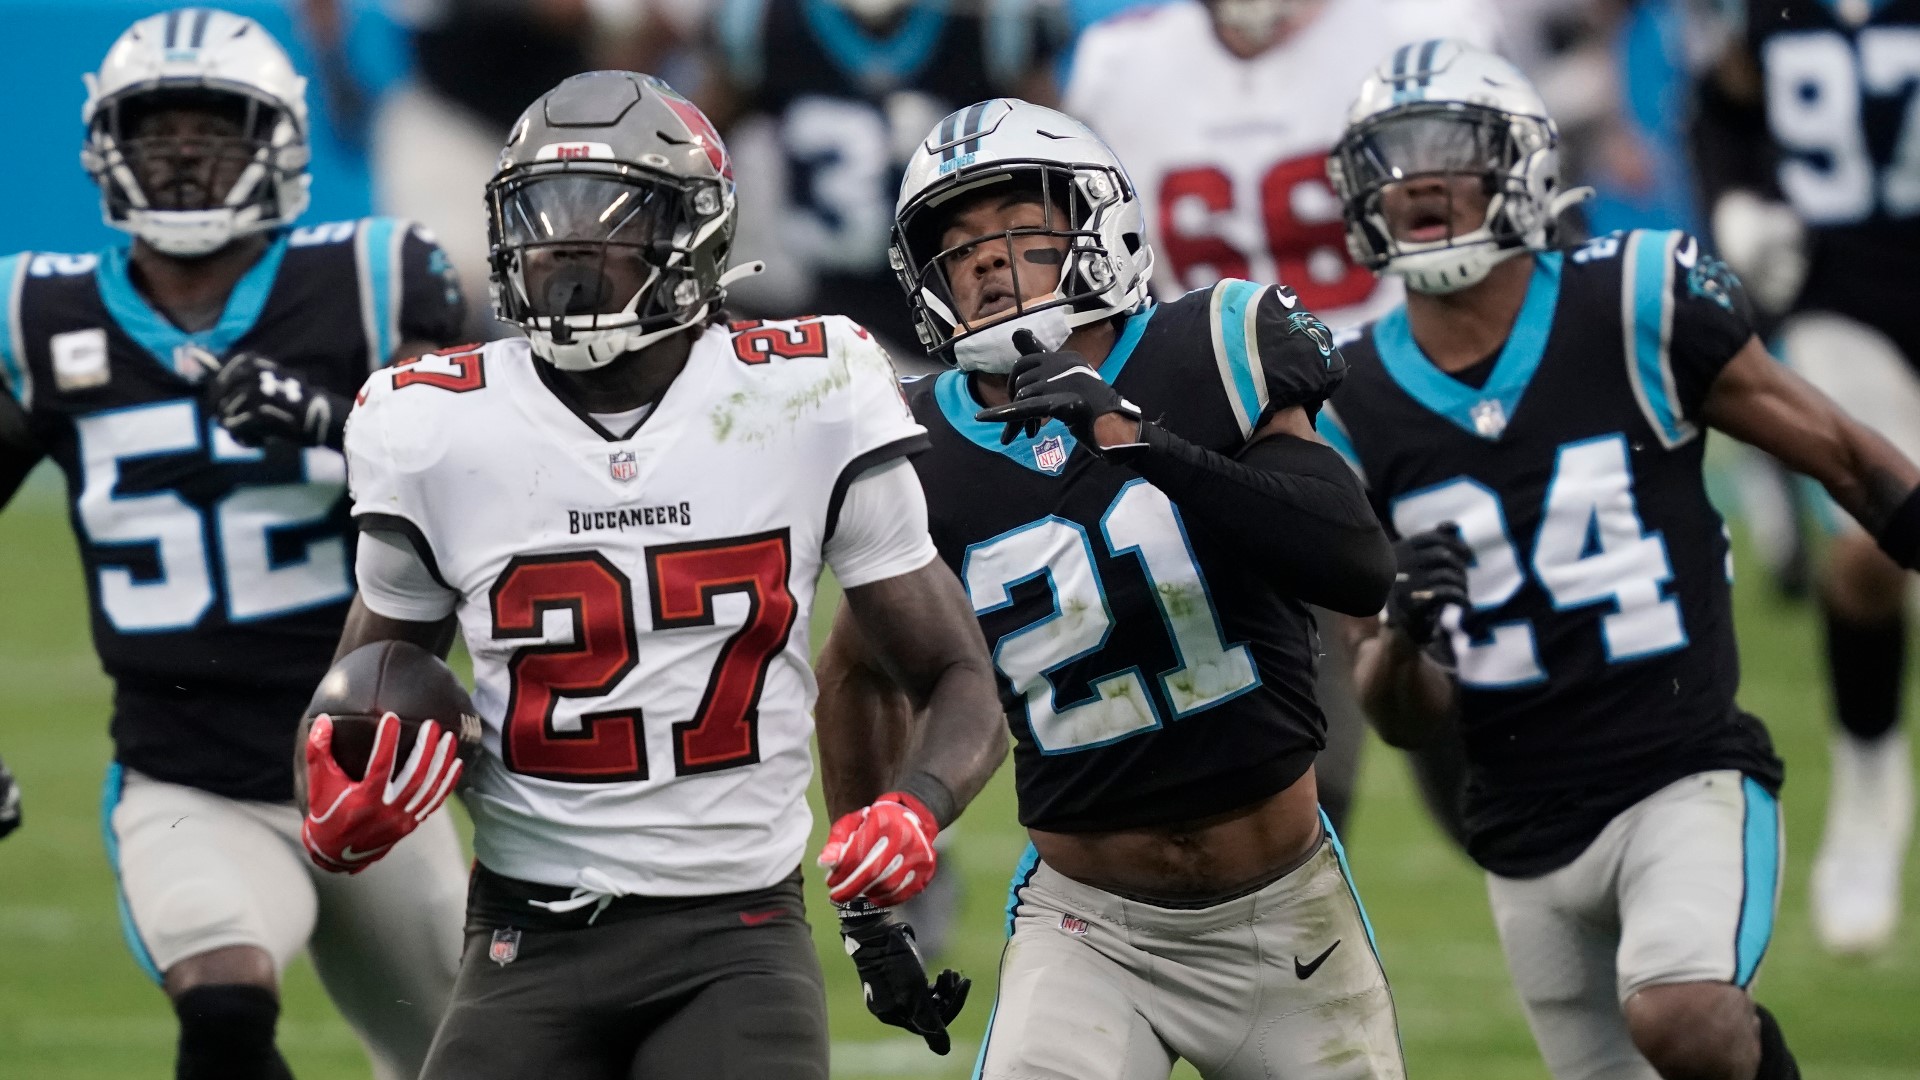 Unlike most of the Panthers' losses this season, this was not a close game. Nick Carboni and Eugene Robinson discuss where the Panthers go from here.